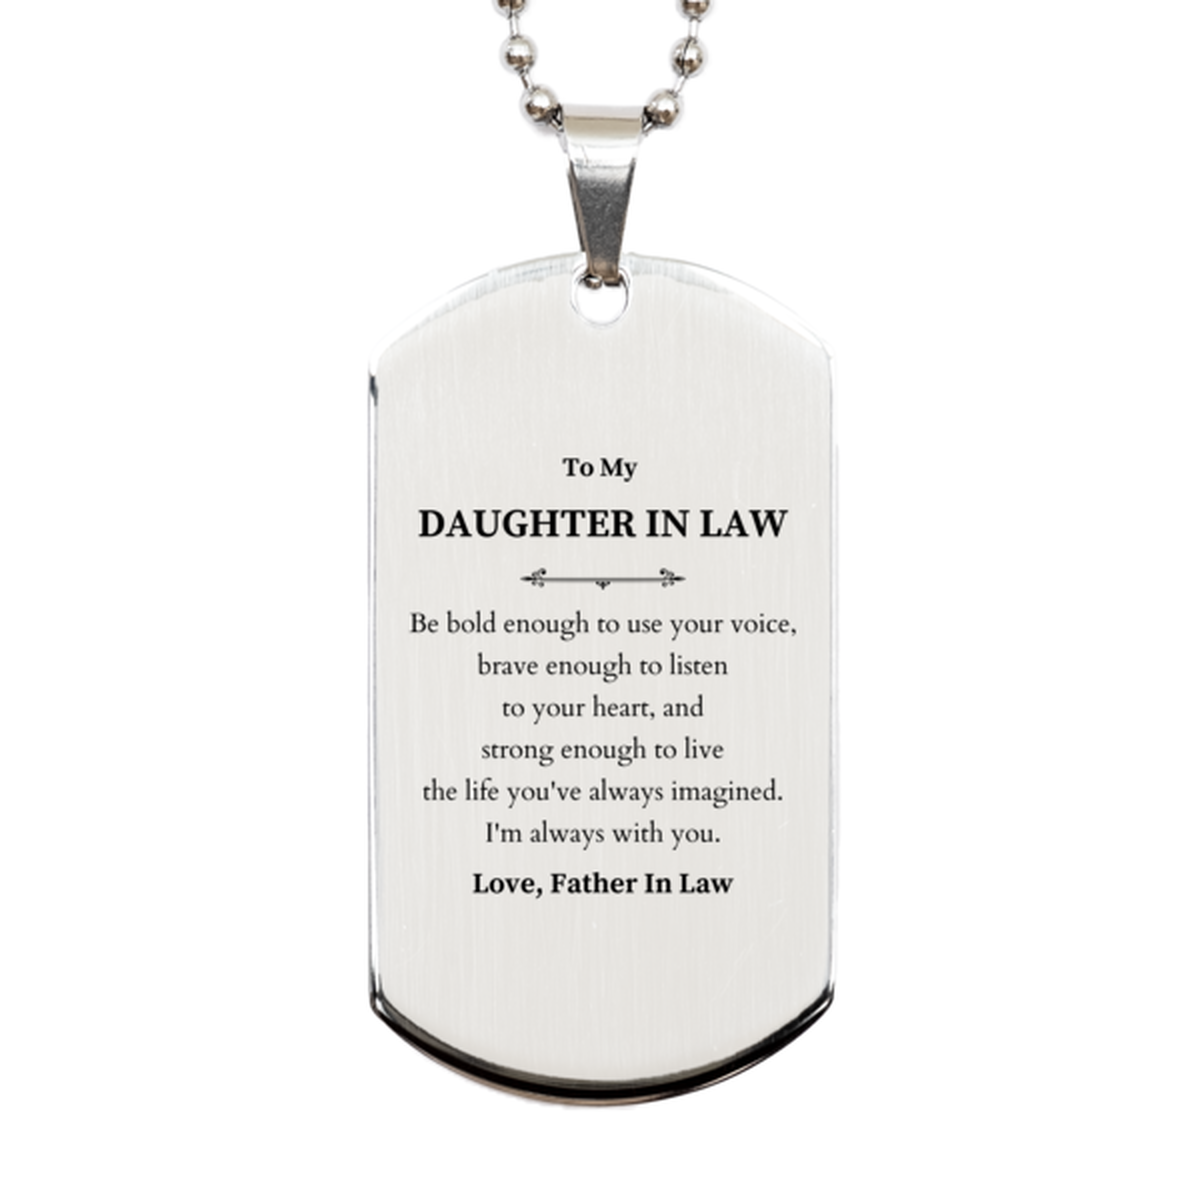 Keepsake Daughter In Law Silver Dog Tag Gift Idea Graduation Christmas Birthday Daughter In Law from Father In Law, Daughter In Law Be bold enough to use your voice, brave enough to listen to your heart. Love, Father In Law